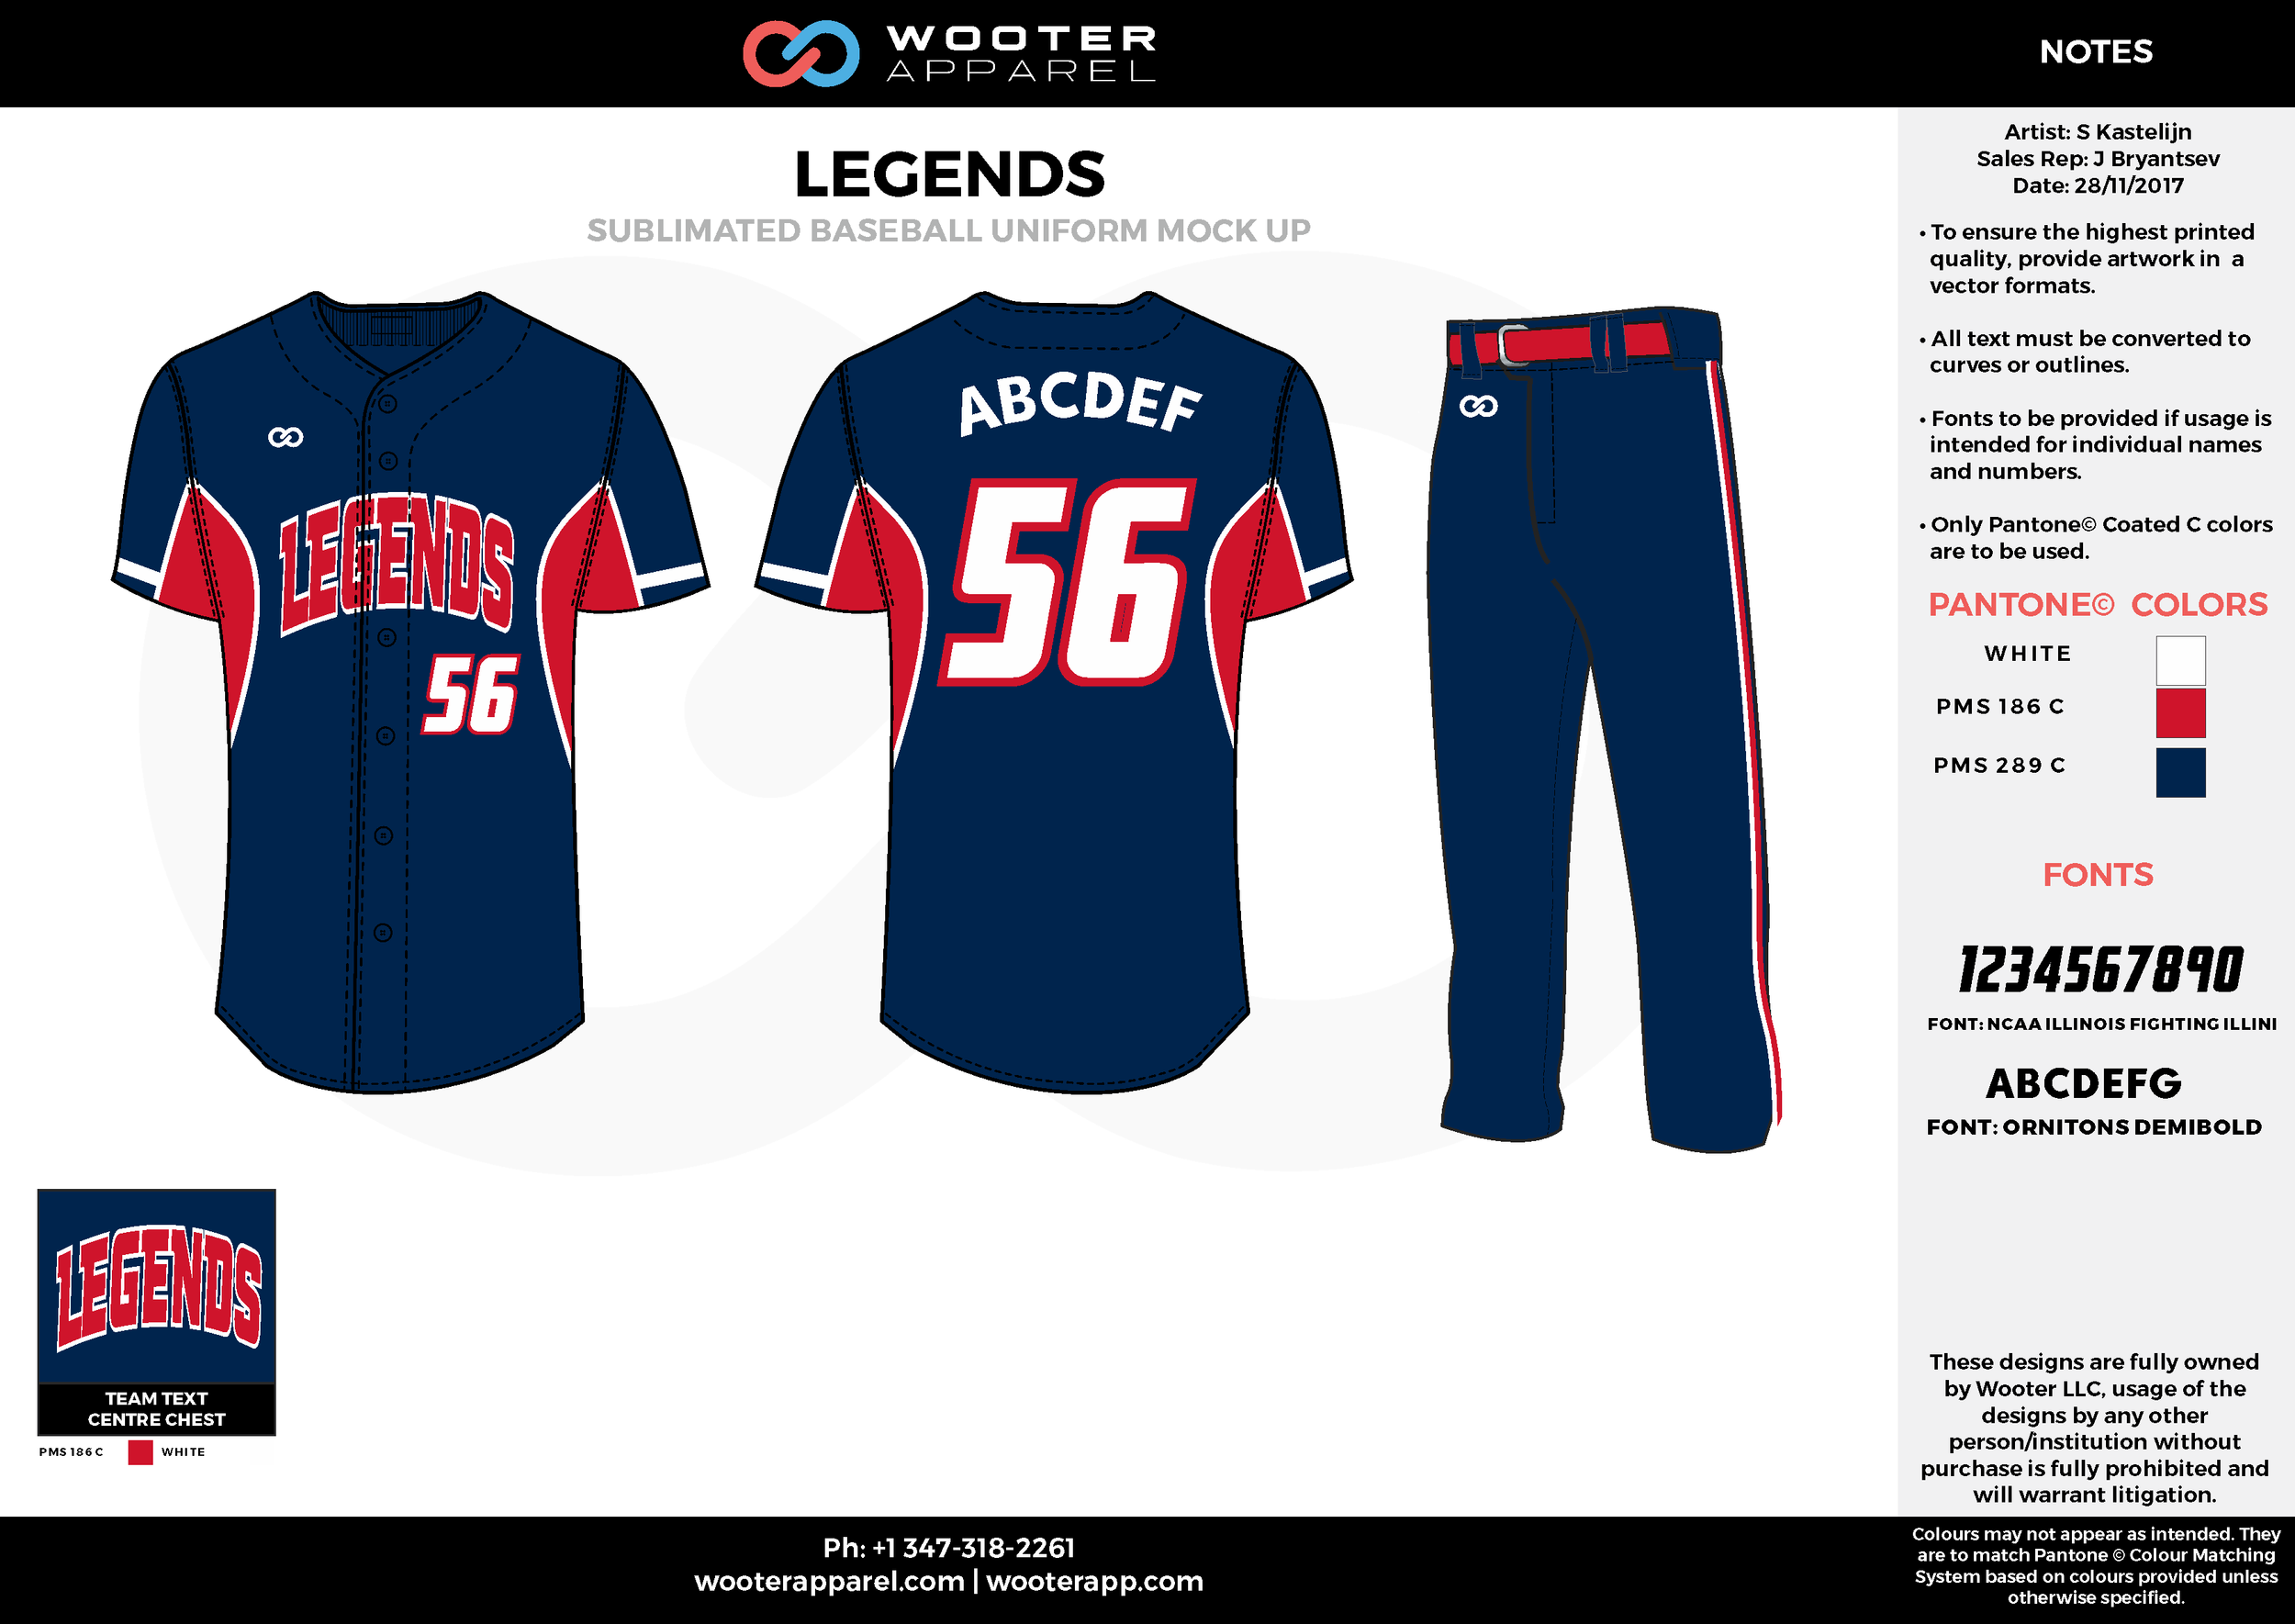 red and blue baseball jersey